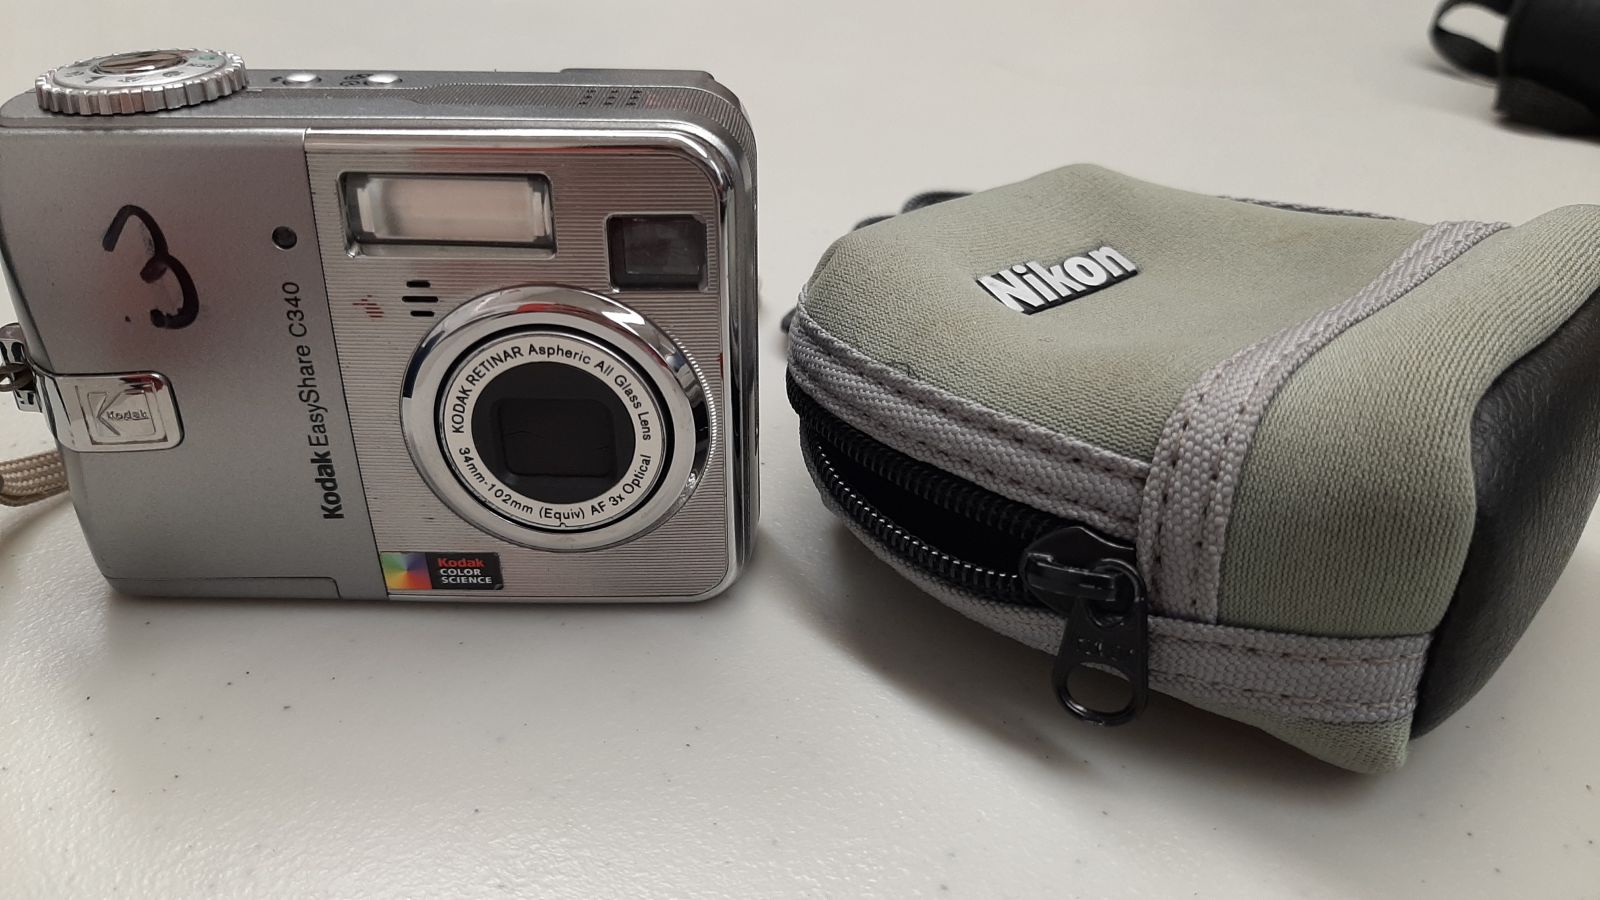 An image of a digital camera with a case.